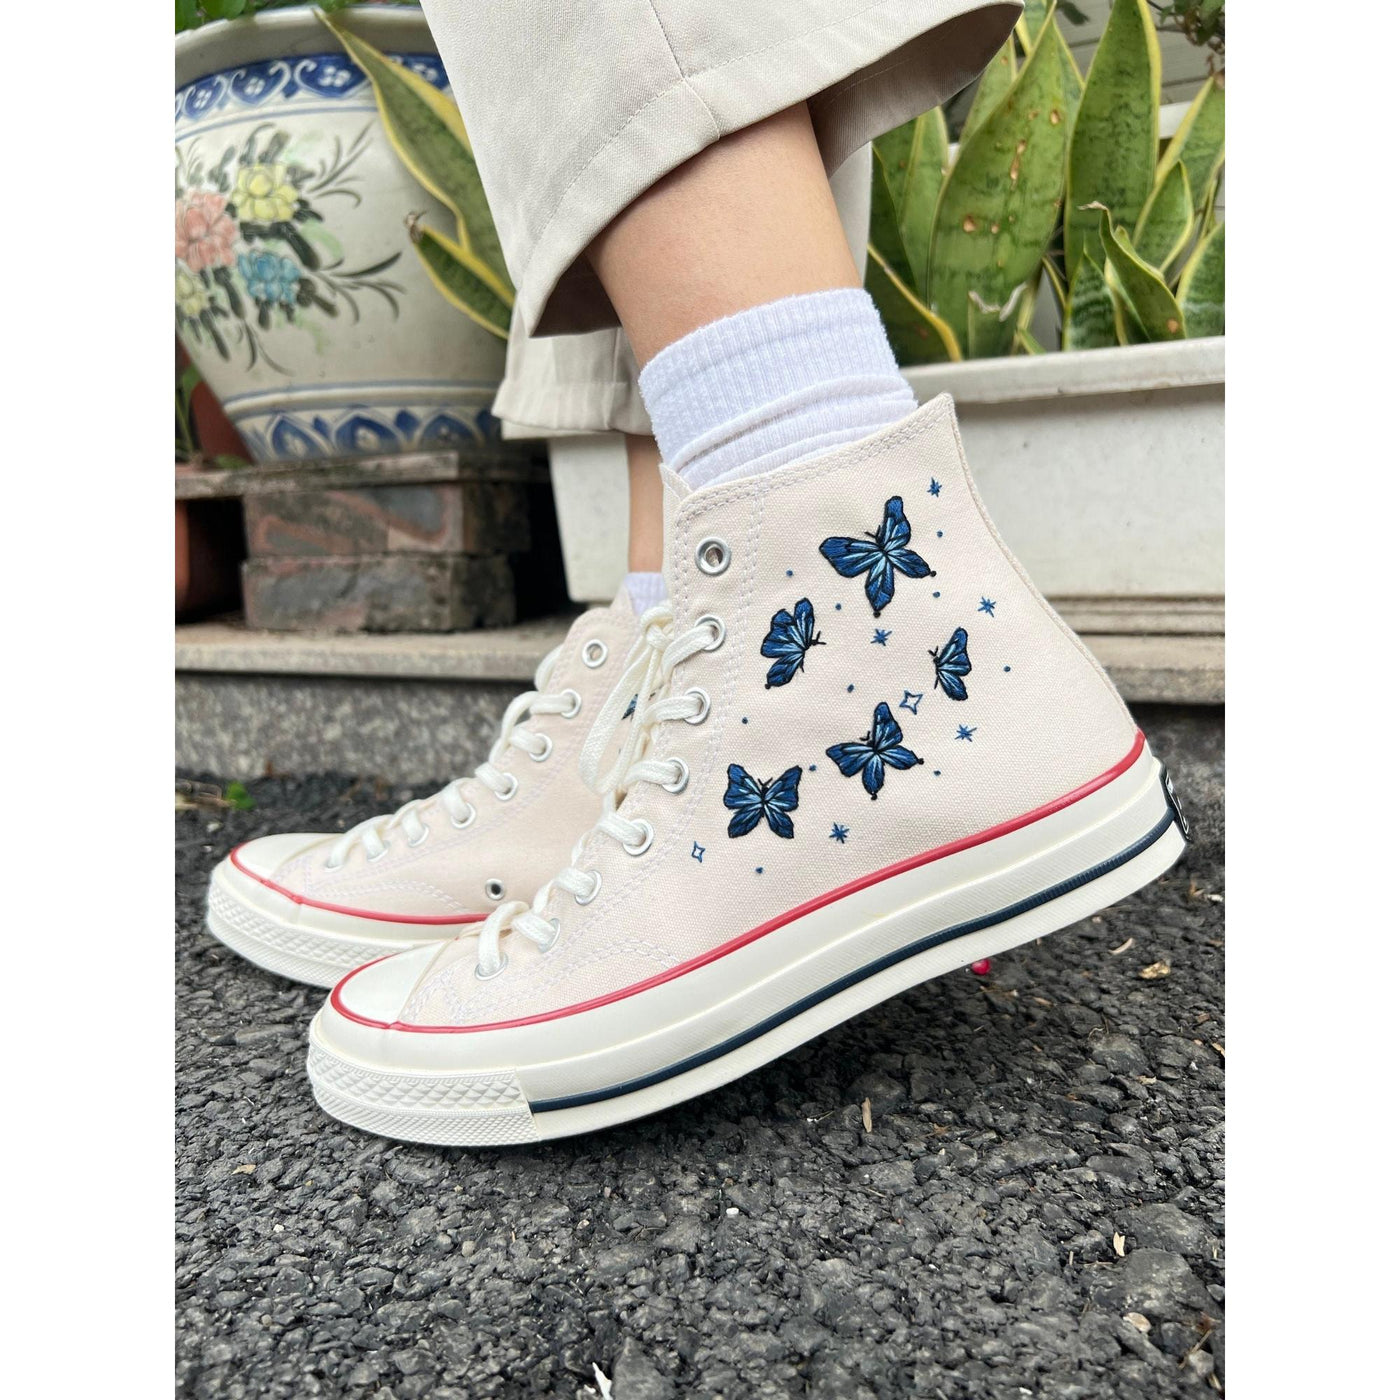 Embroidered Converse,Butterfly Converse,Embroidered Blue Butterflies